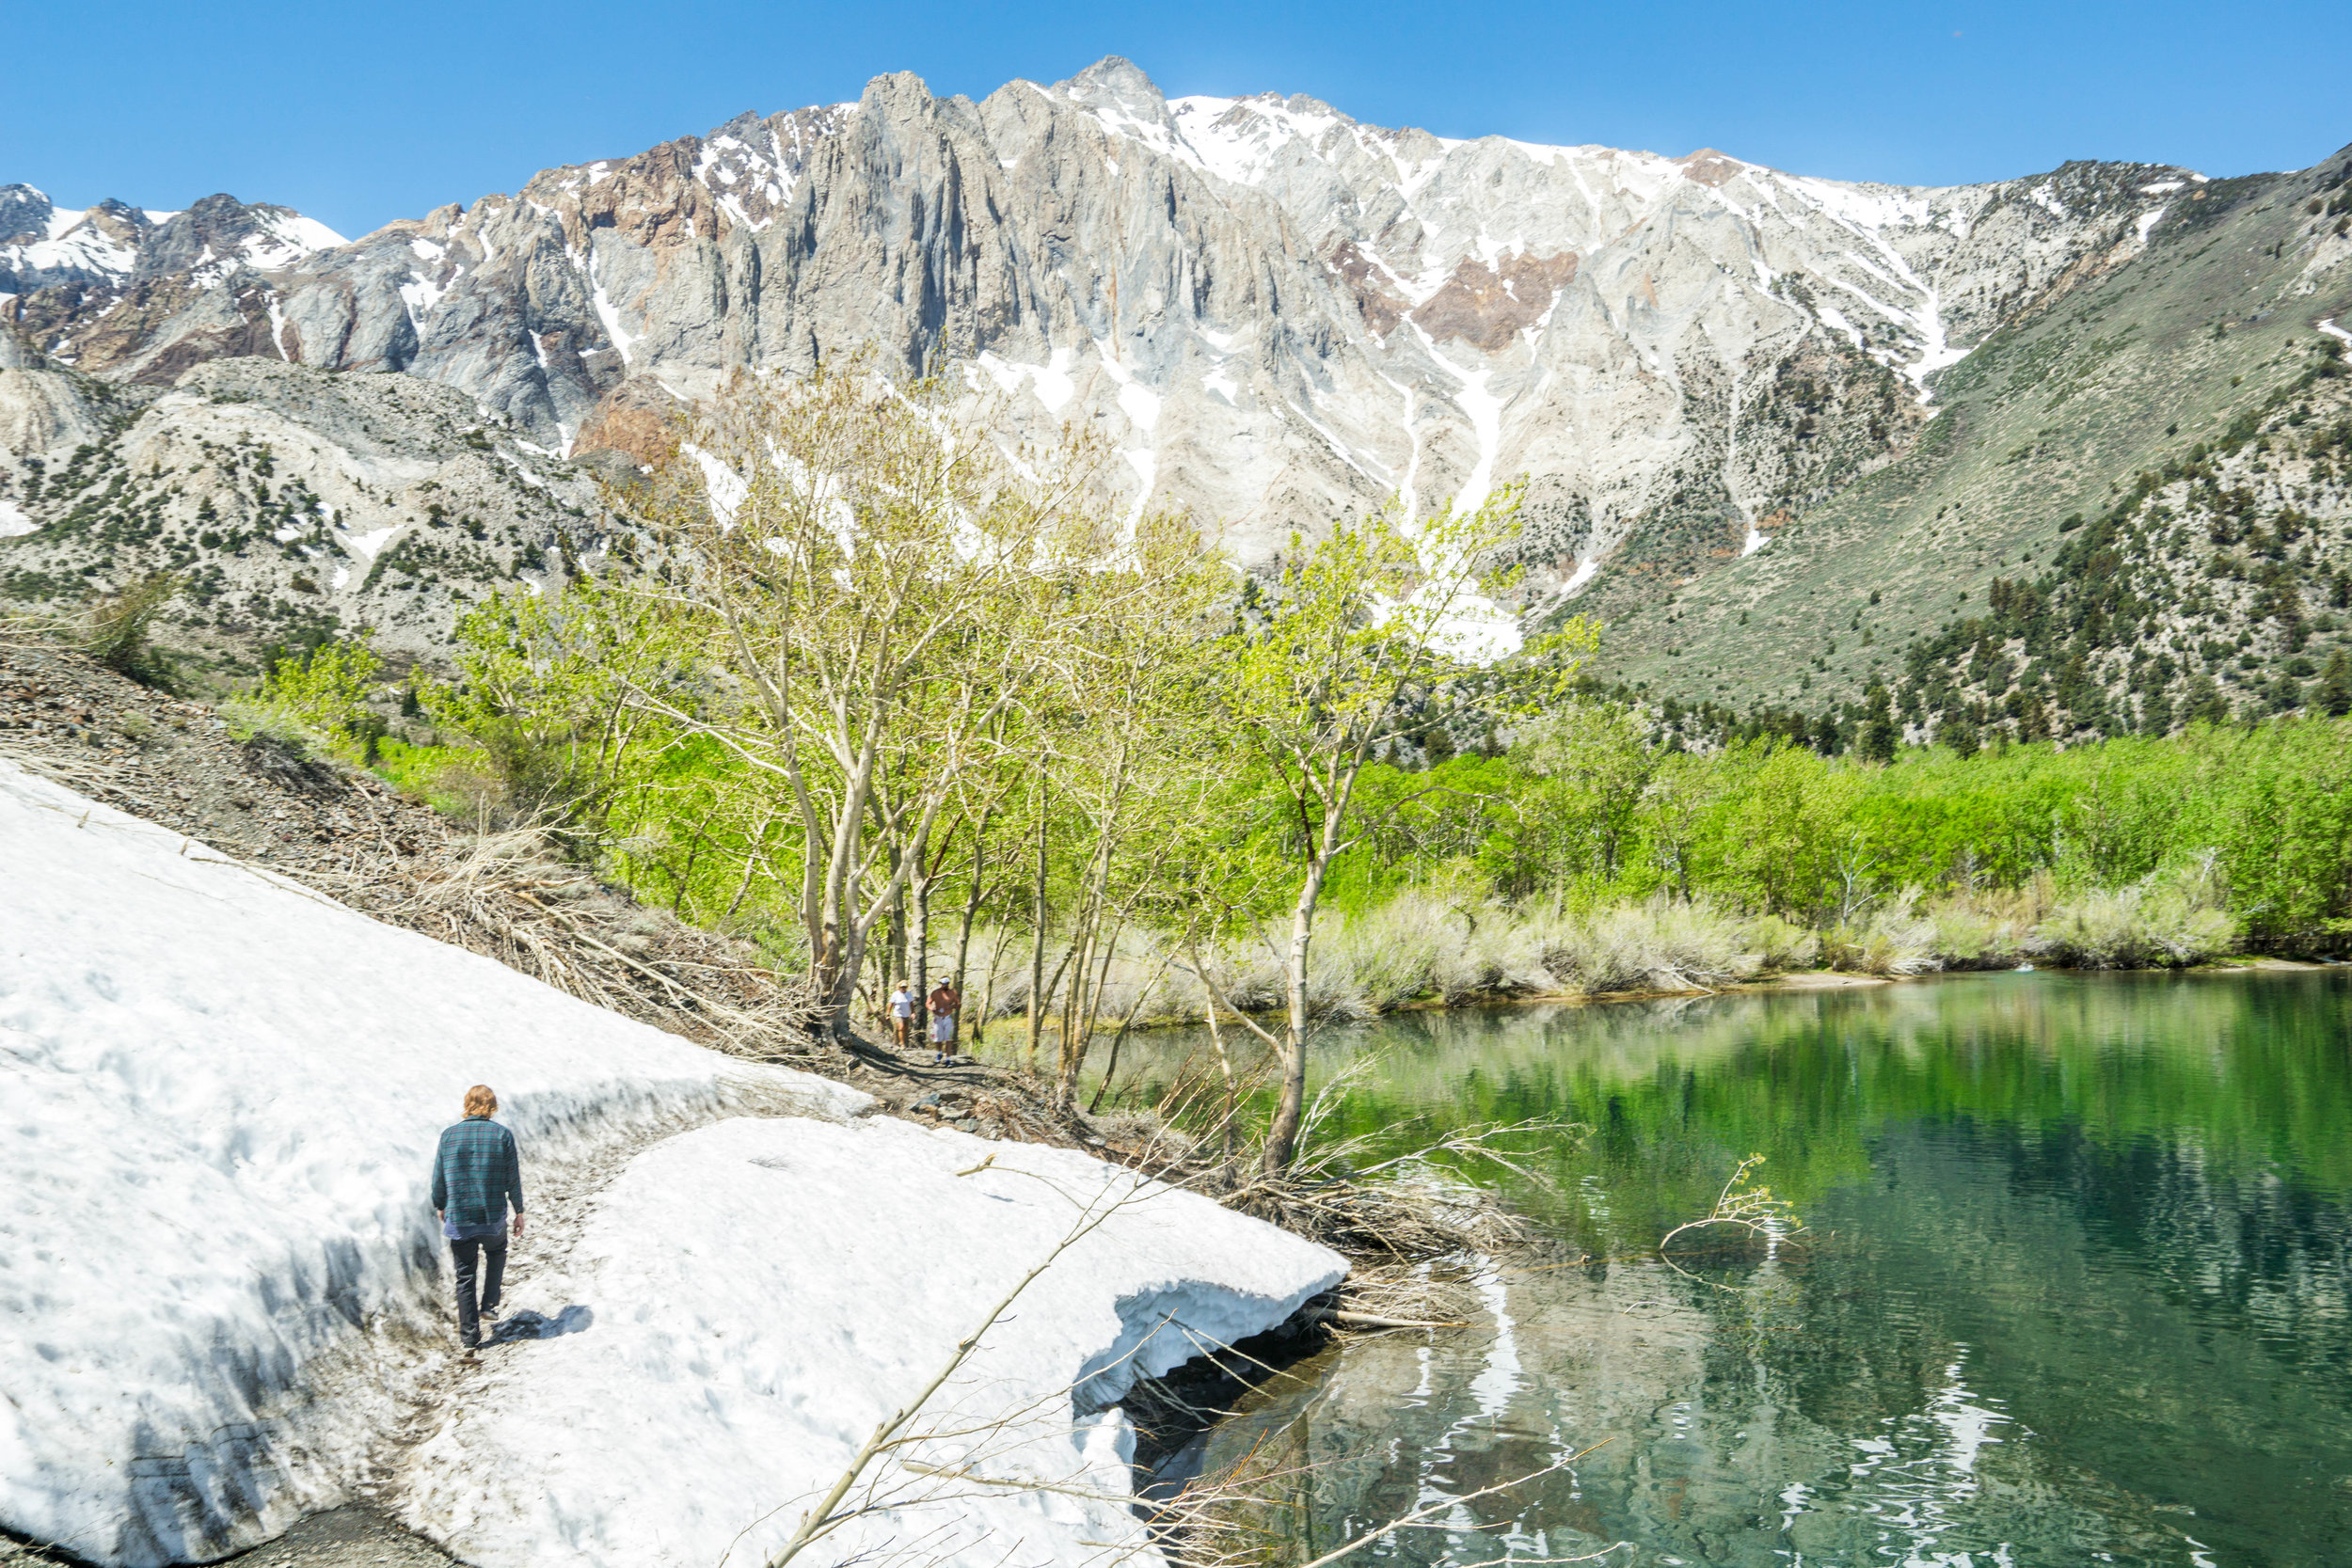 Even in late Spring & early Summer, there is frequently snow on the trail in the Sierra Nevadas. Walking without traction, we methodically crossed to assure we didn't slip & slide into the lake.